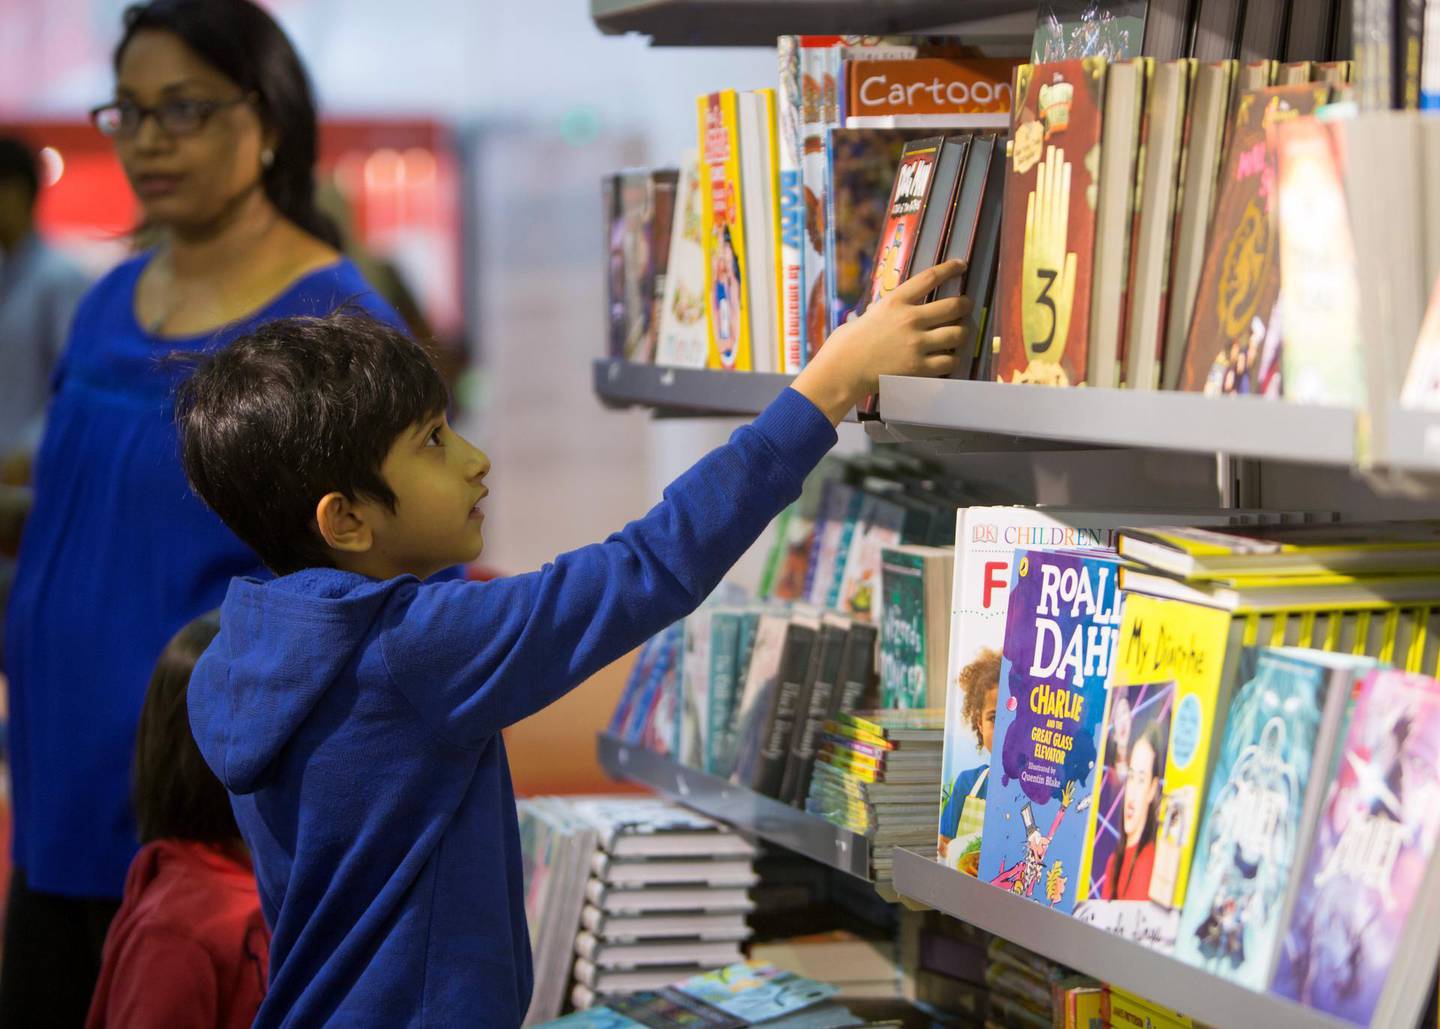 At the heart of the book fair is an expansive children’s programme. Leslie Pableo for The National